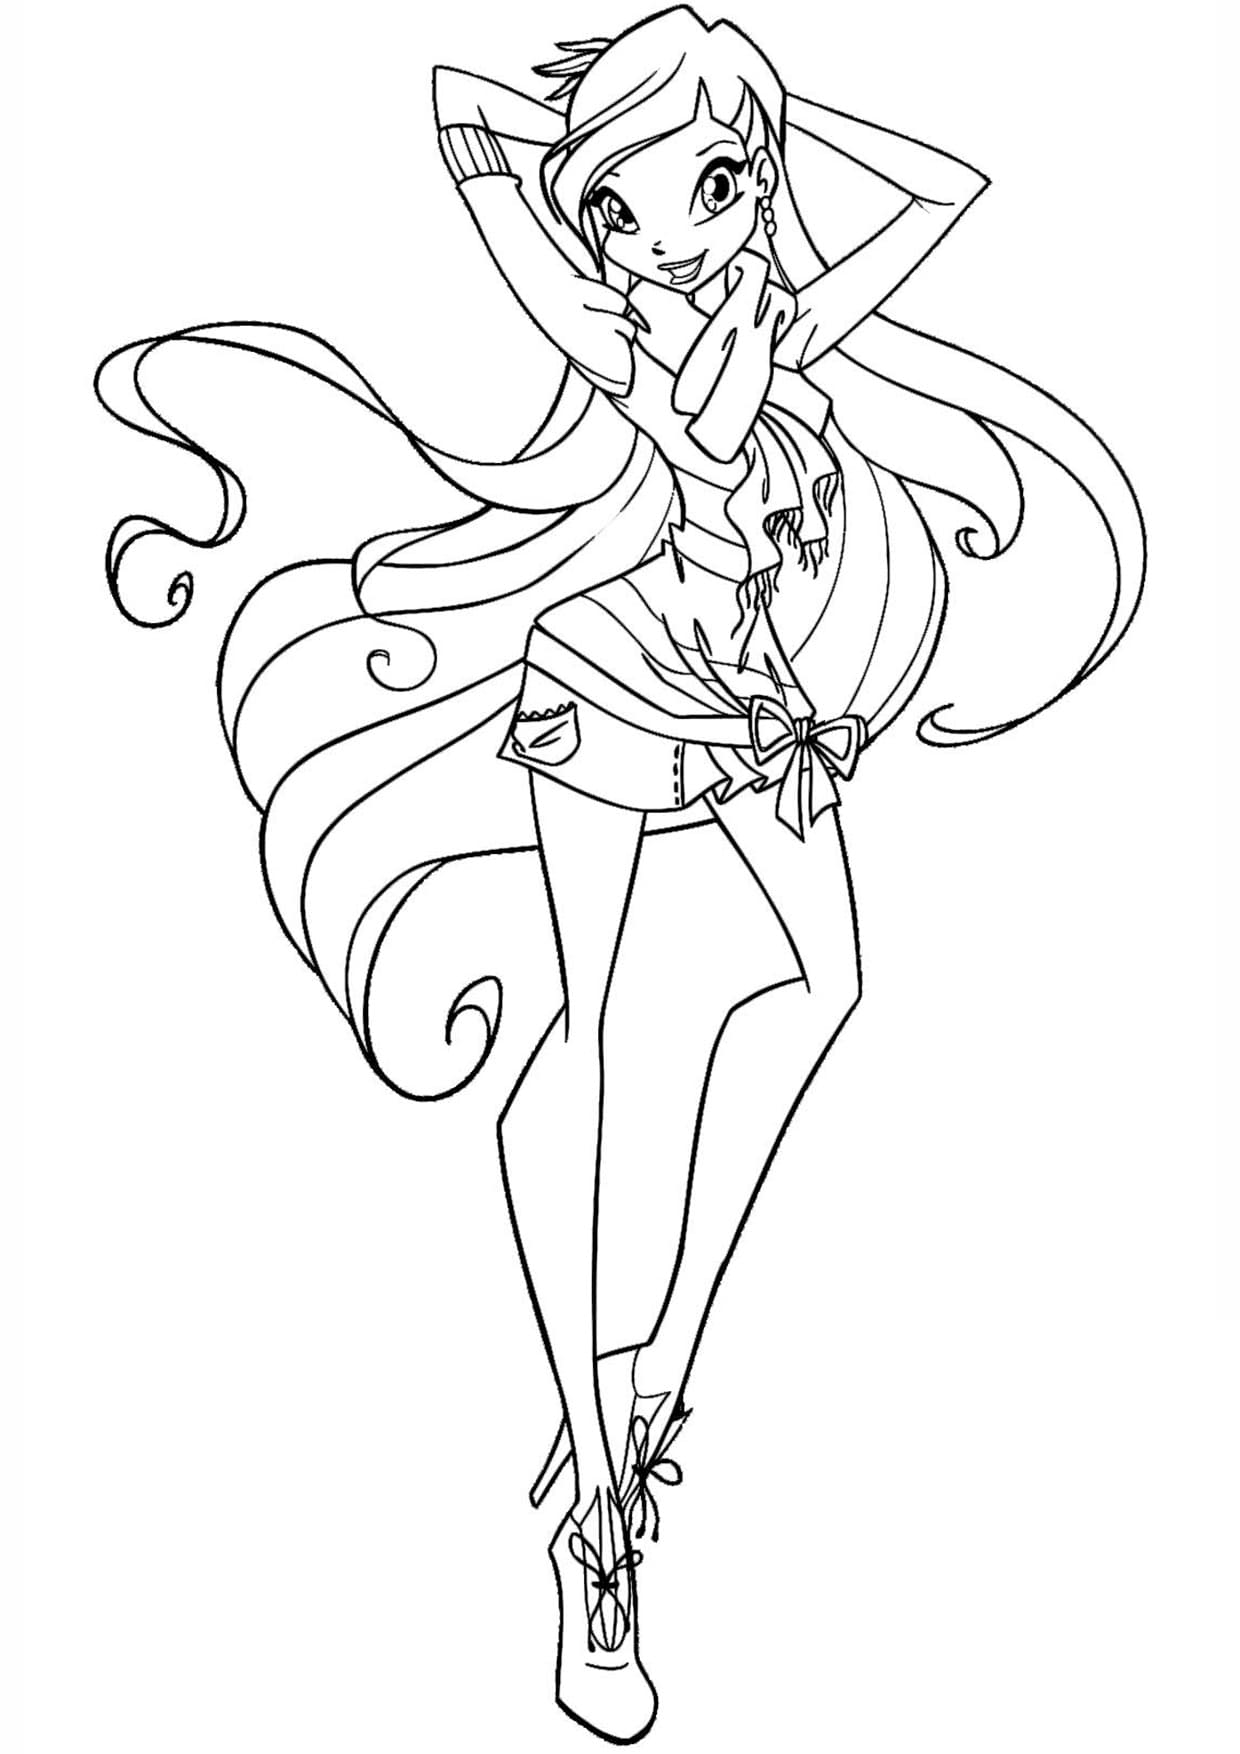 Amazing Winx Club Stella coloring page - Download, Print or Color ...